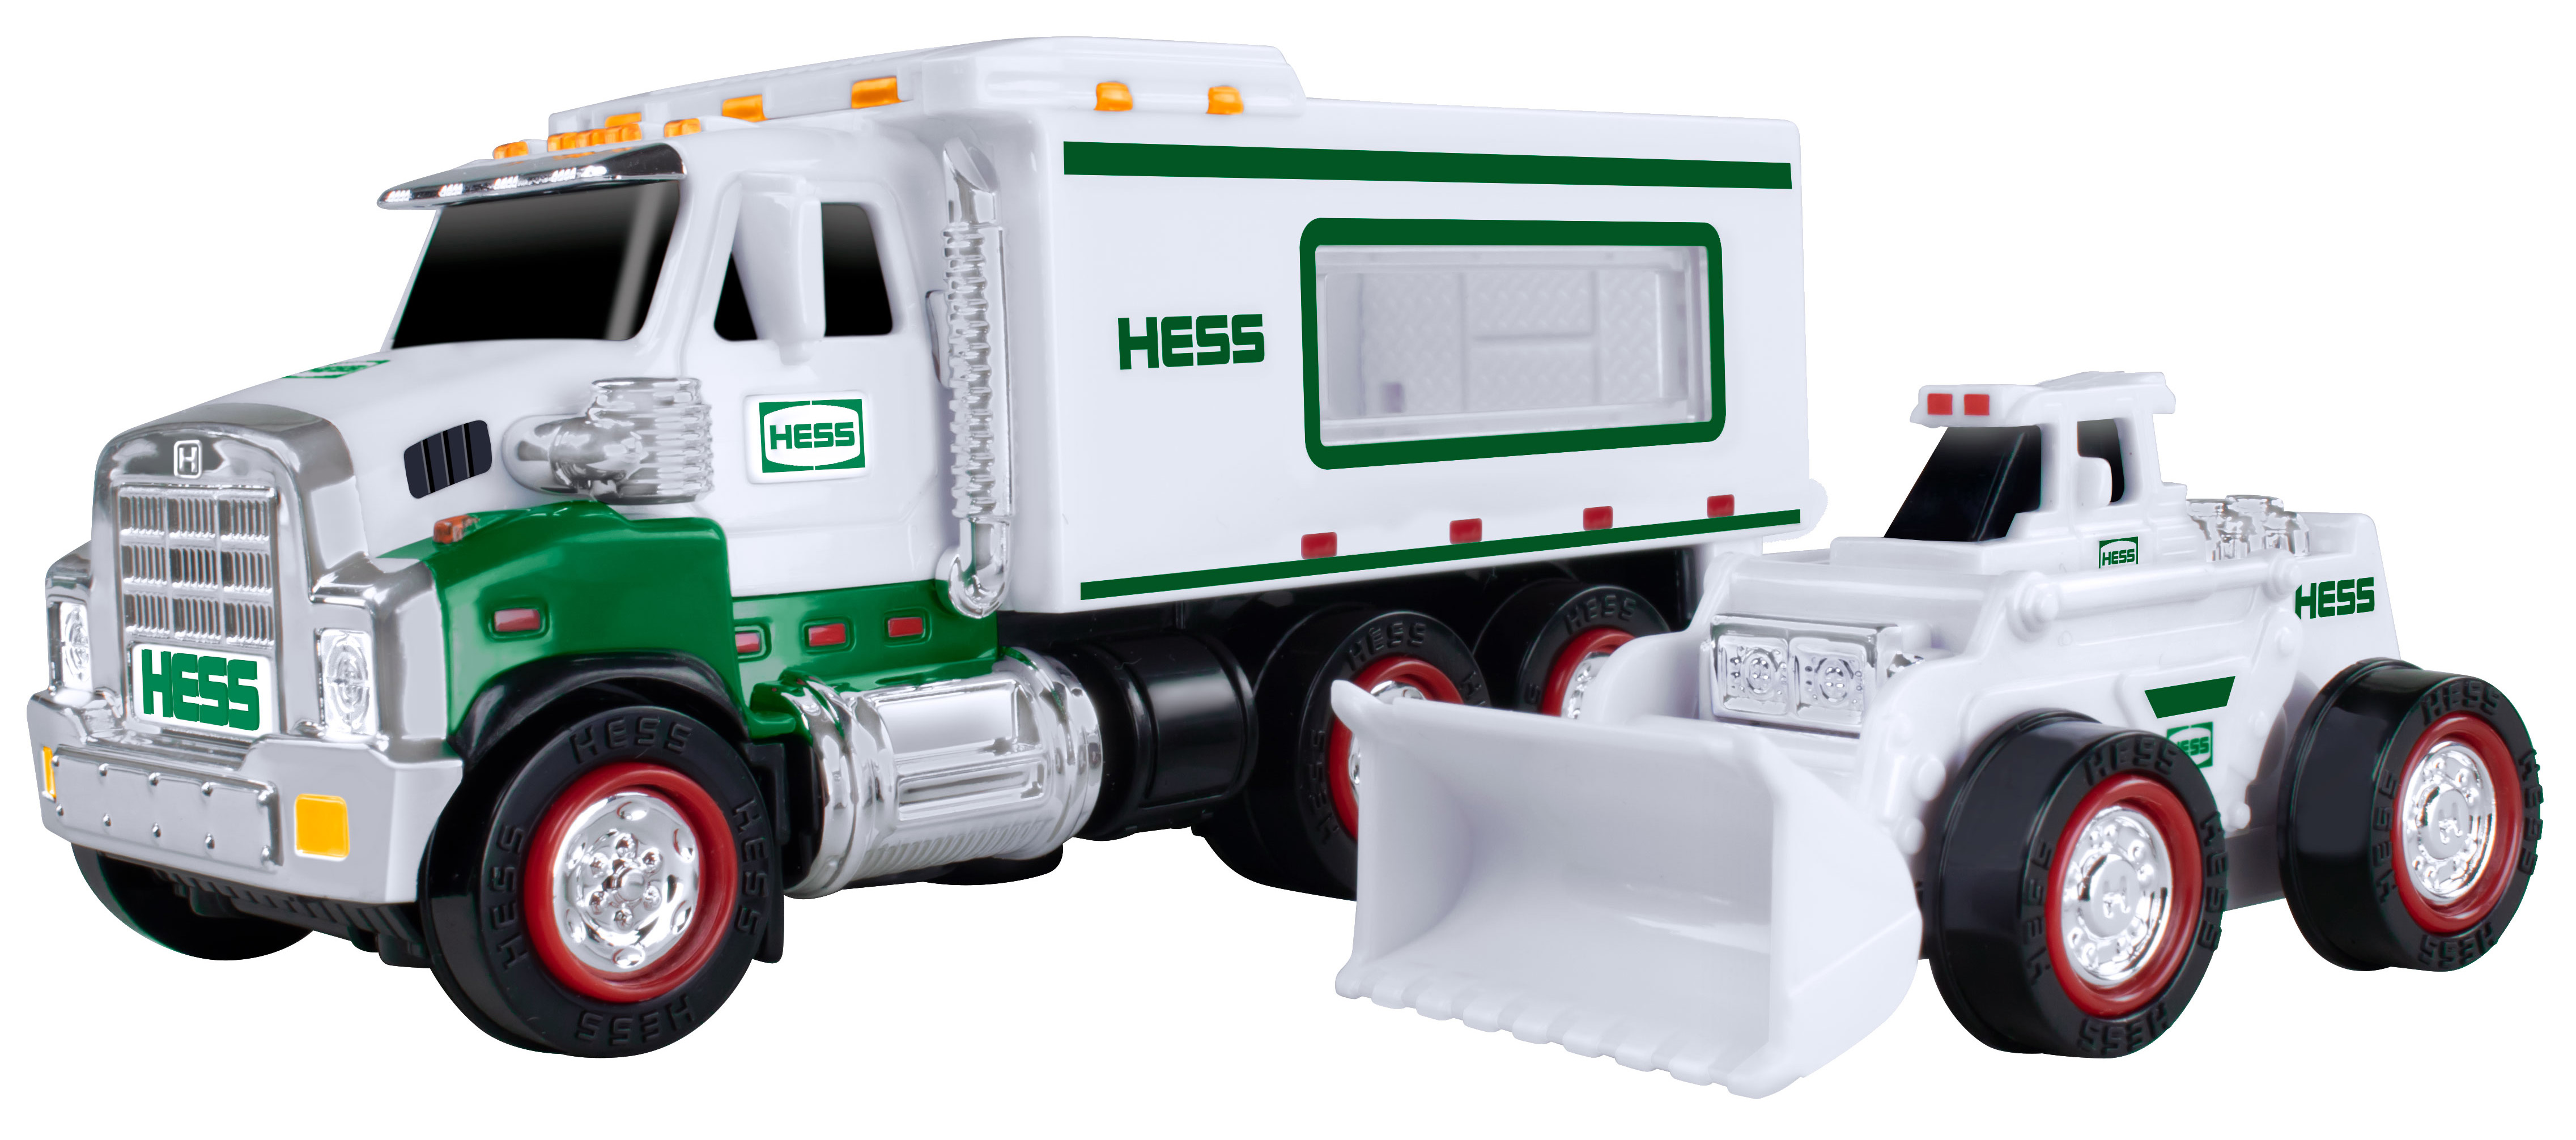 2021 Hess Truck "Mini" 3 Truck Collection Brand New in Box!! Limited Edition 